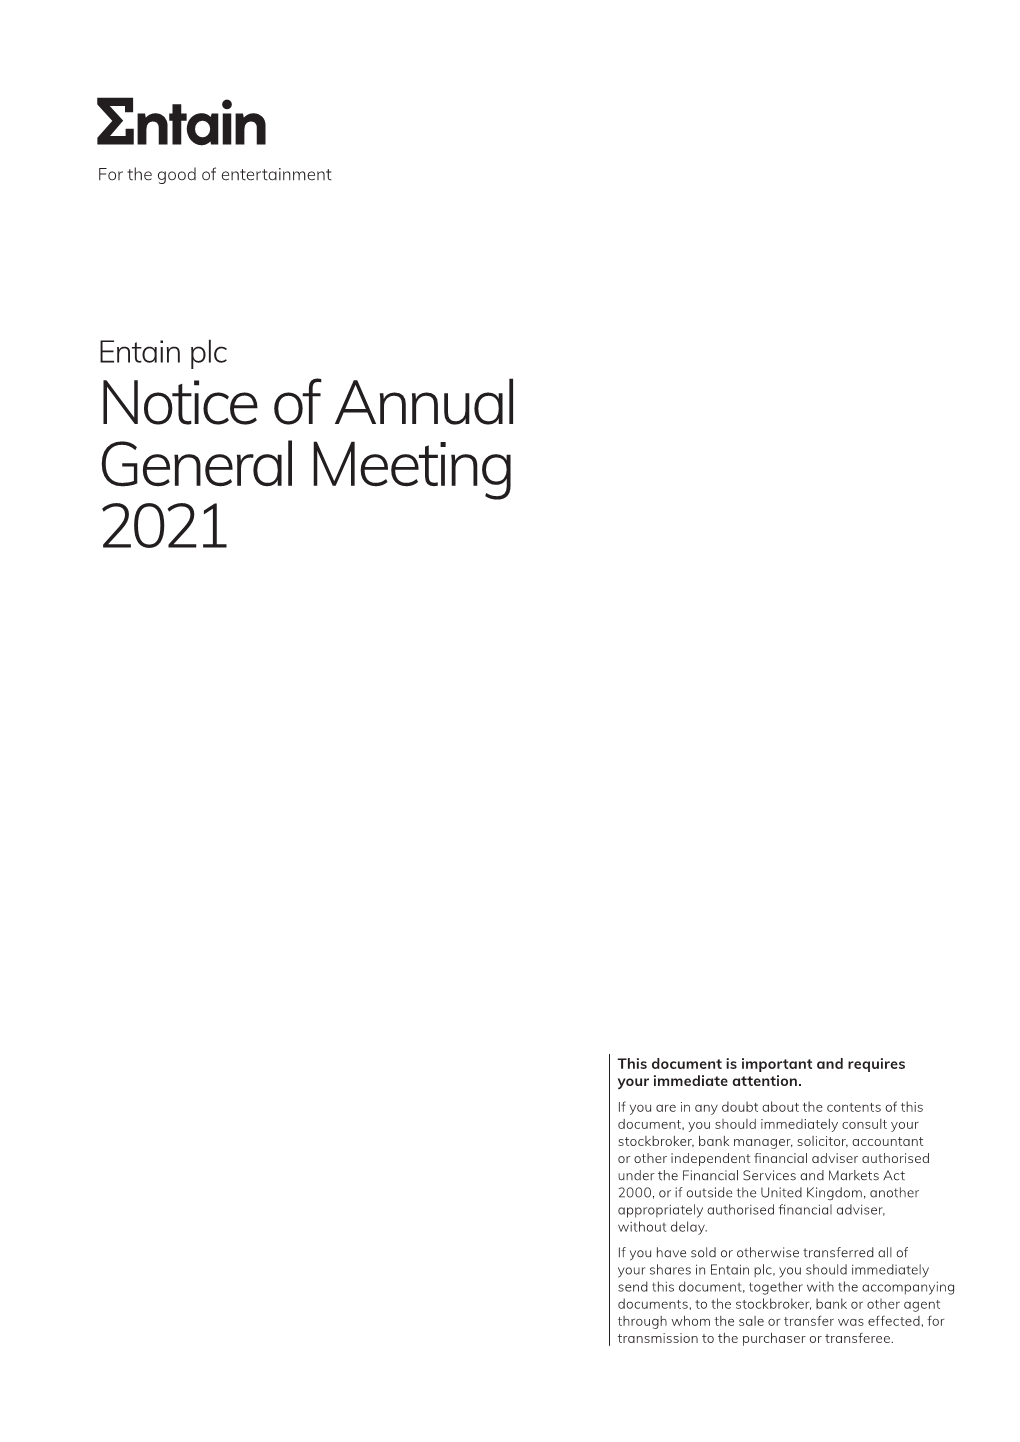 Entain Plc Notice of Annual General Meeting 2021